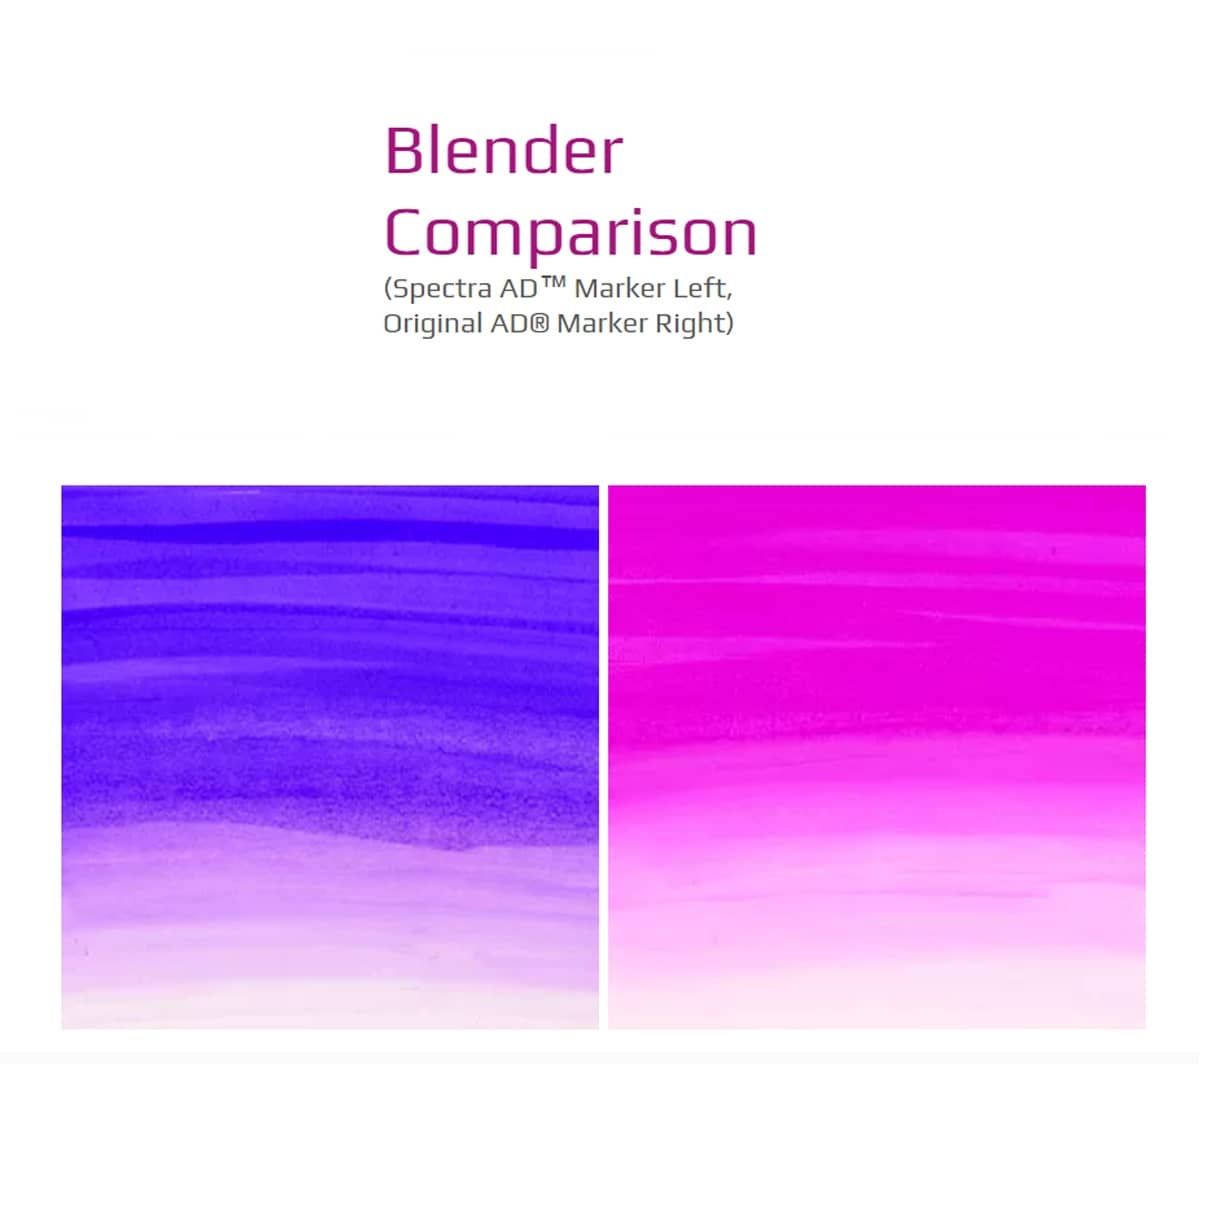 Perfect for creating gradients, blends, and mixes